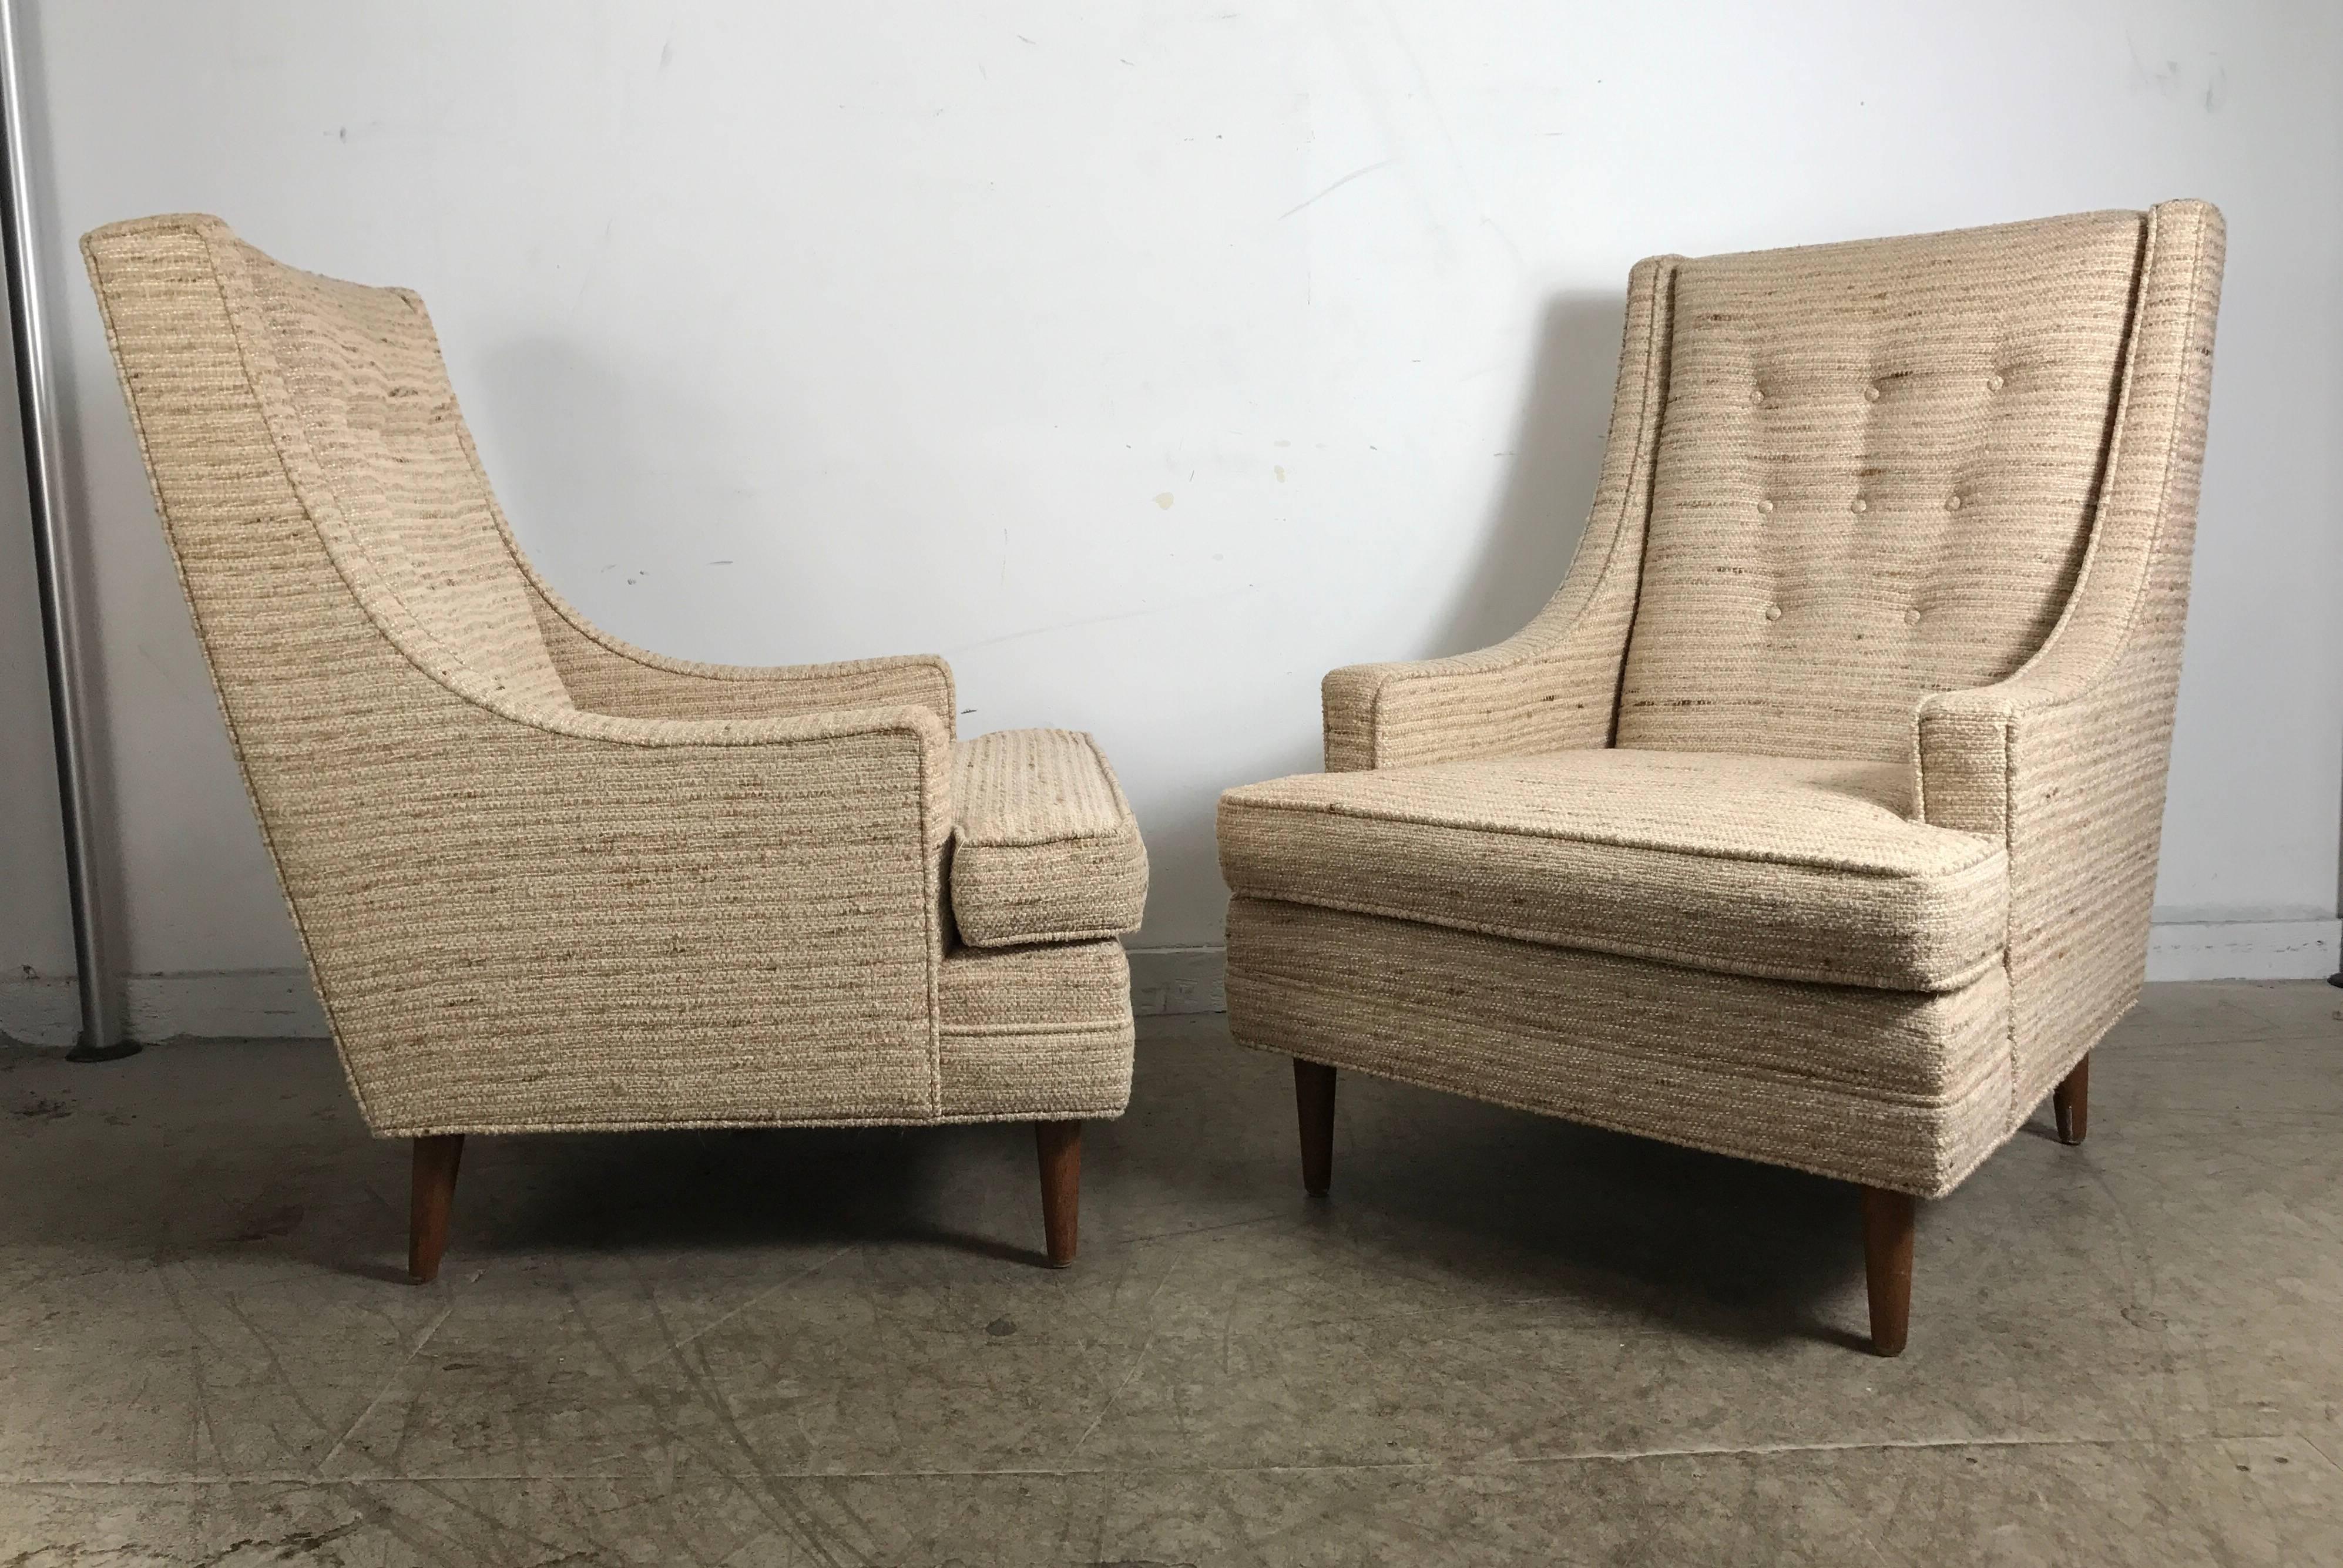 20th Century Classic Mid-Century Modern Highback Lounge Chairs after Harvey Probber